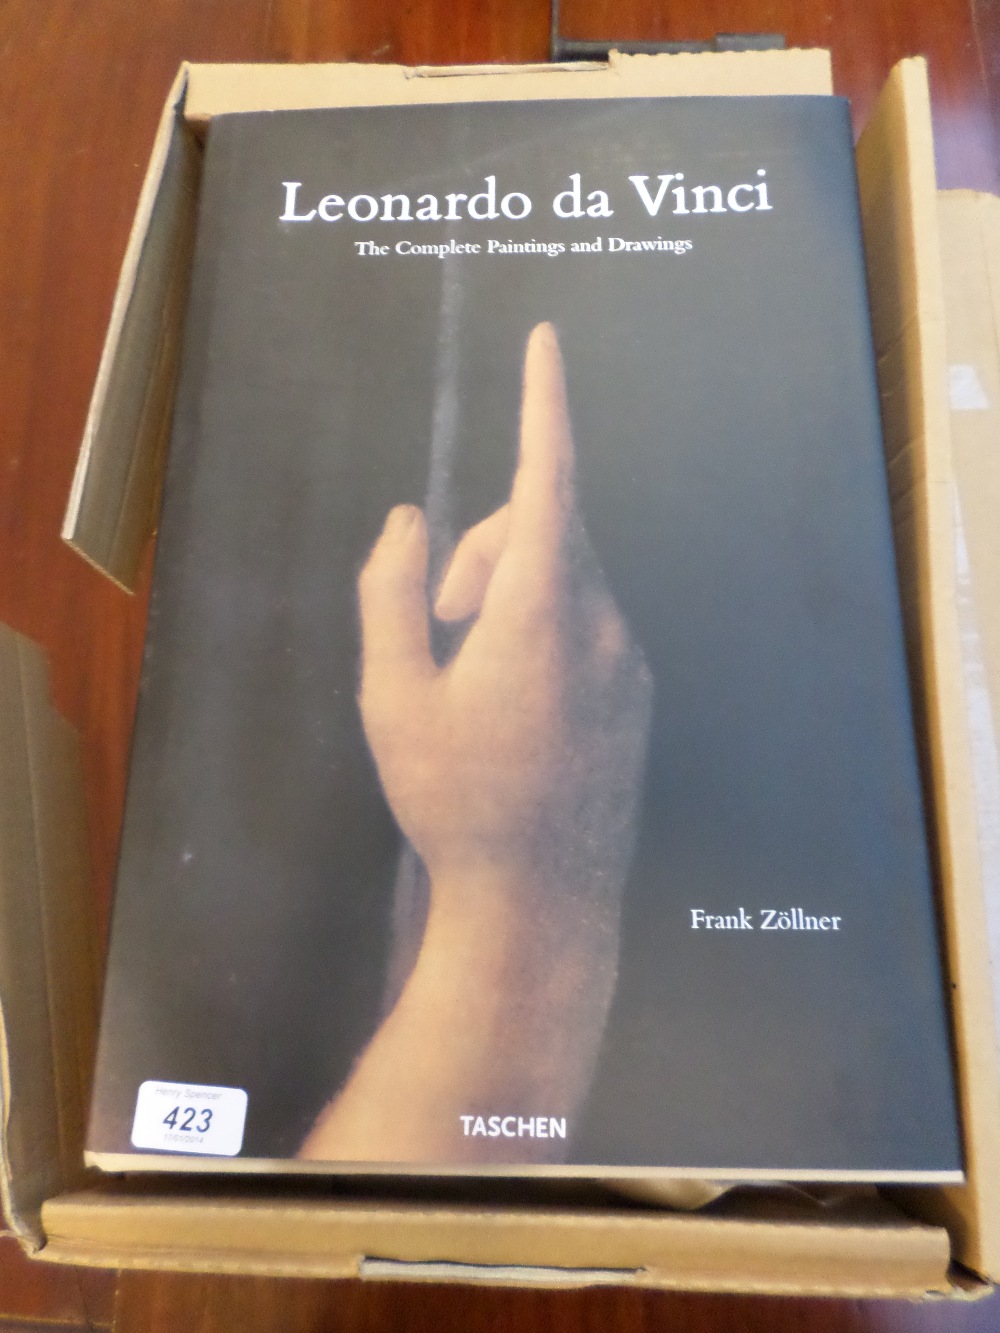 Boxed and new Leonardo Da Vinci complete paintings and drawings book by Frank Zollner